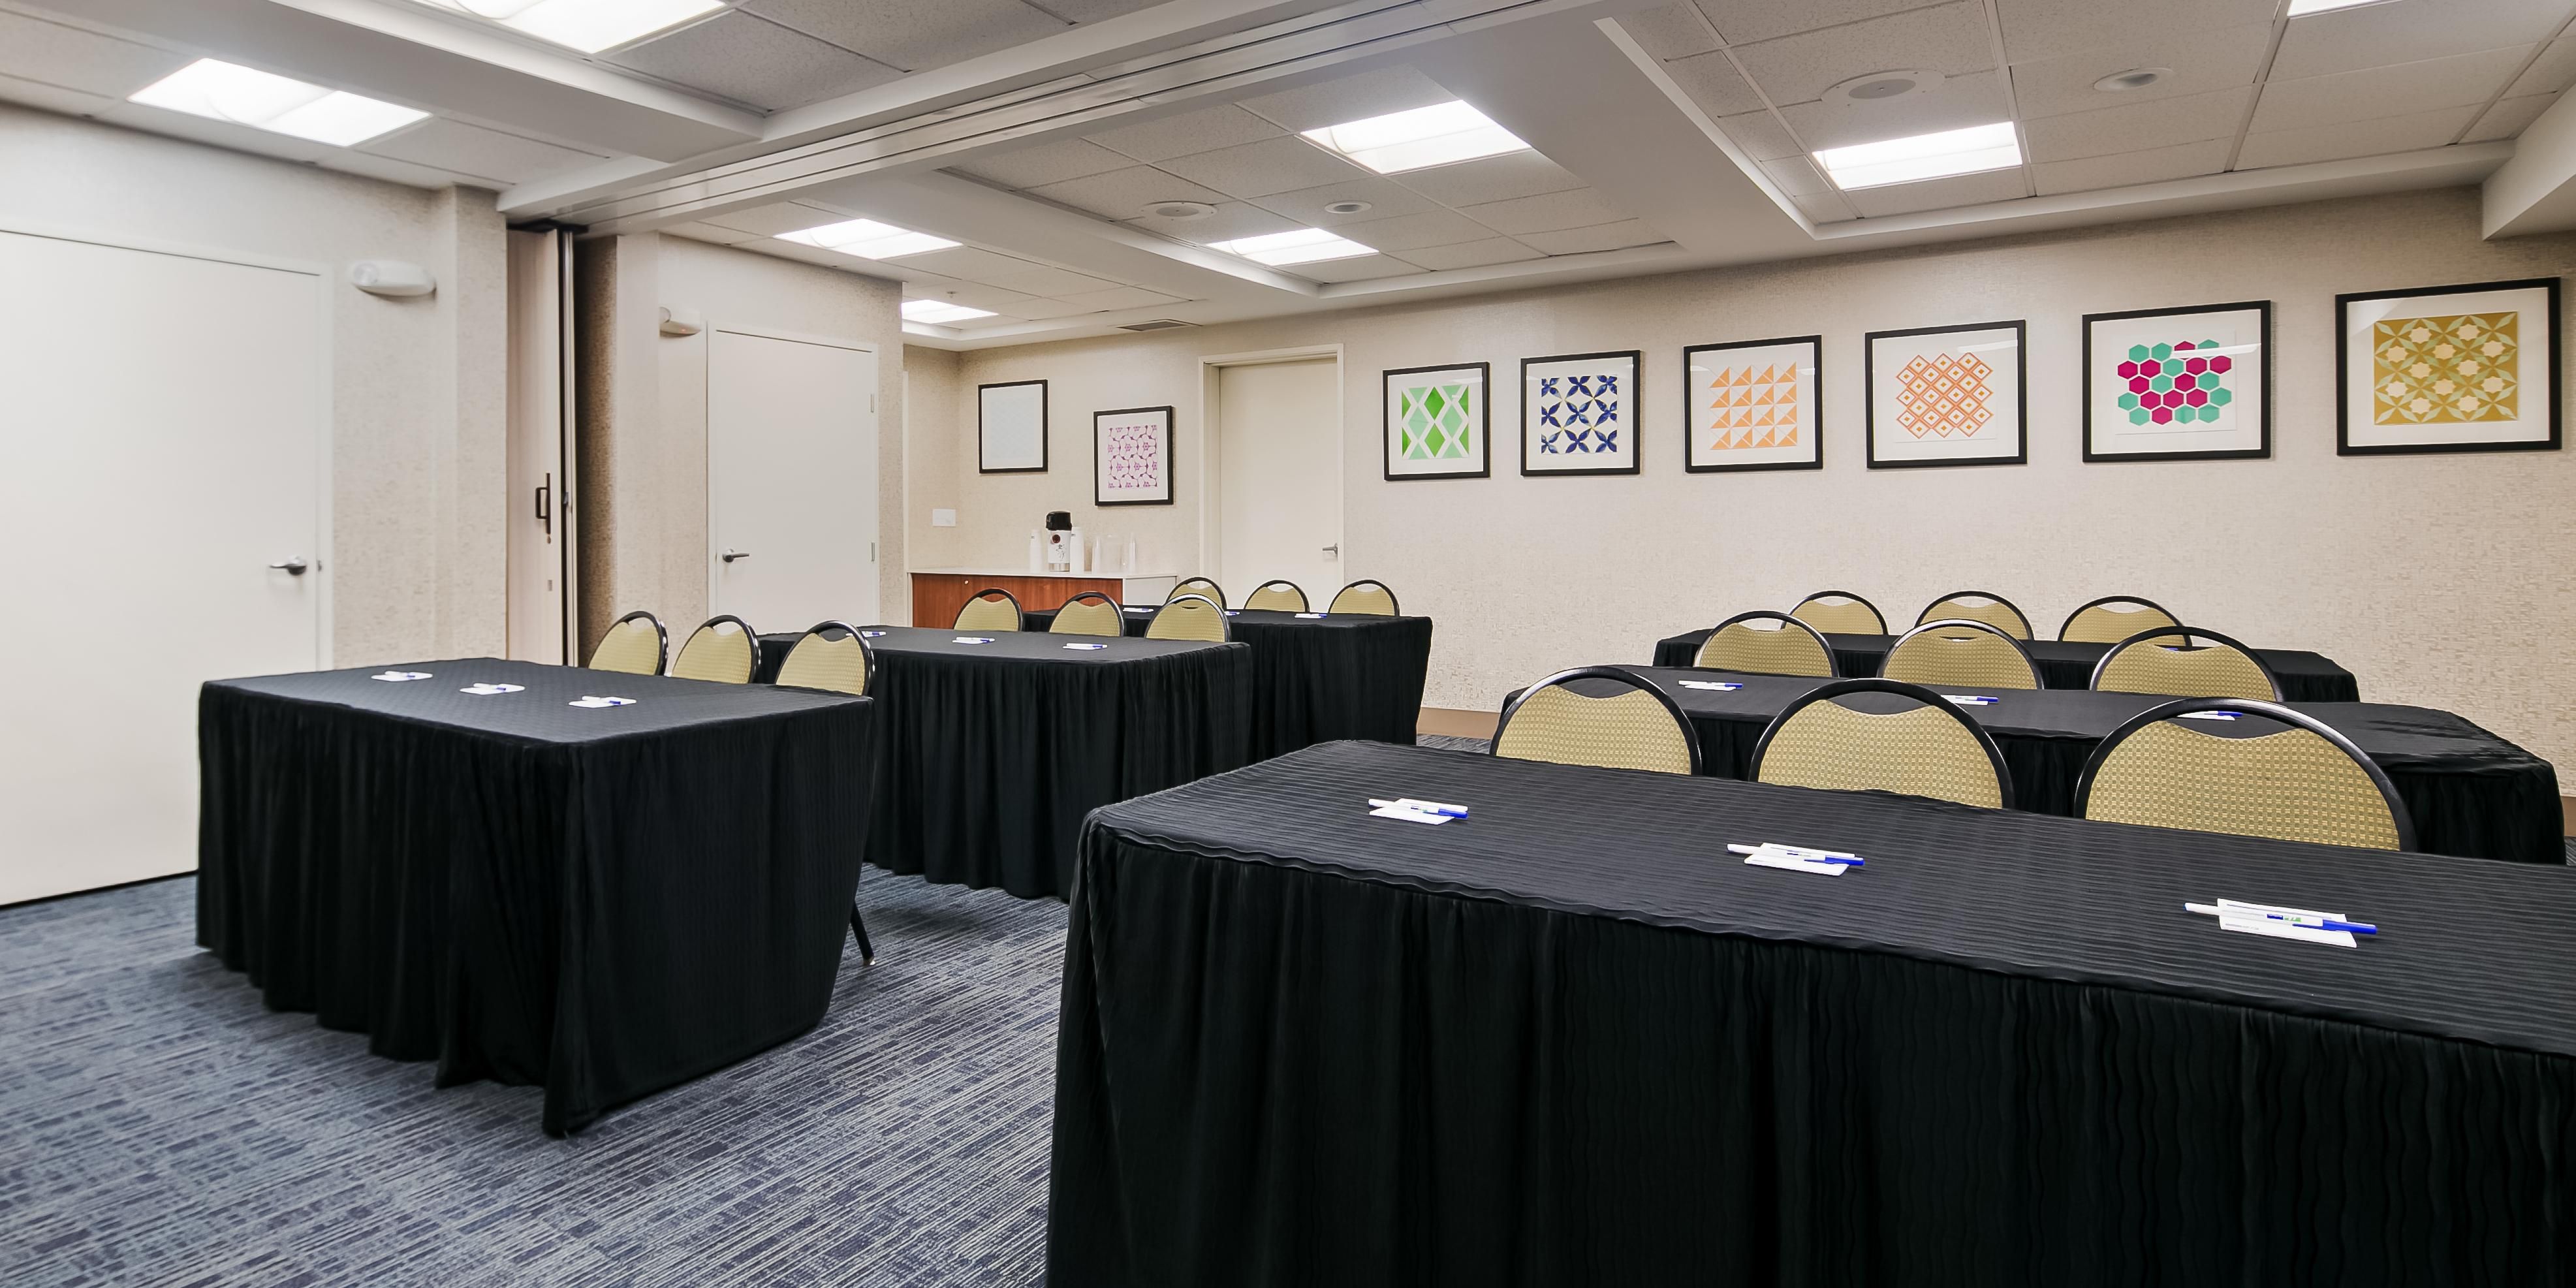 We offer 550 sq ft of flexible meeting space.  We can accommodate up to 40 people Theater Seating and 24 people Classroom Seating. Please call to check space and the number of people we can accommodate.  Our meeting room features a SMART TV that connects to your laptop for presentations and ZOOM calls.